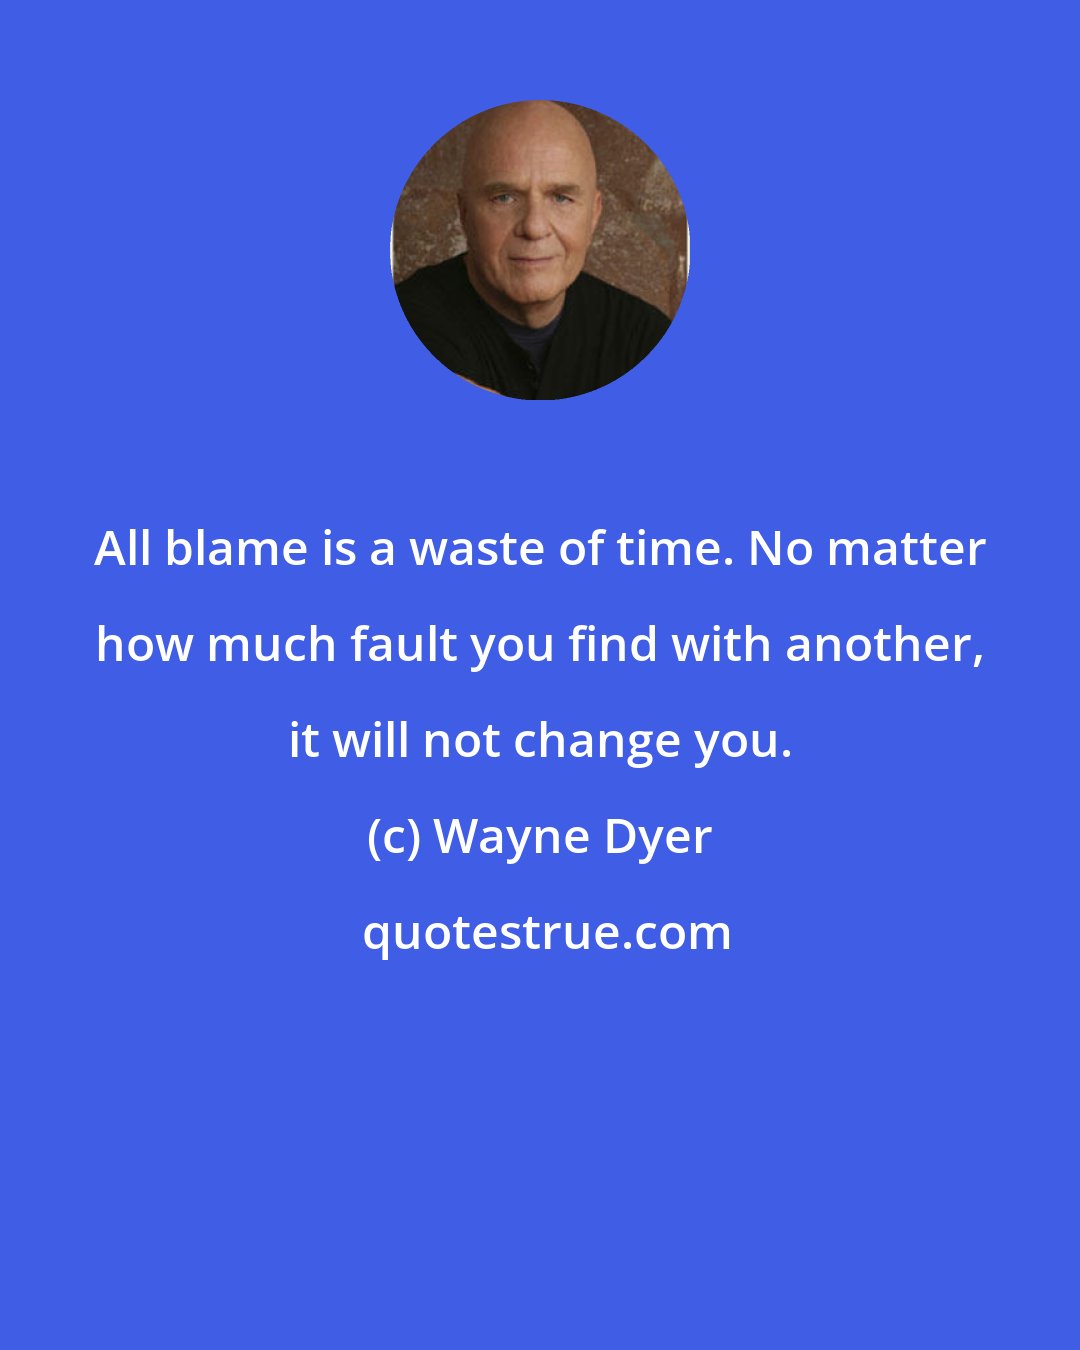 Wayne Dyer: All blame is a waste of time. No matter how much fault you find with another, it will not change you.